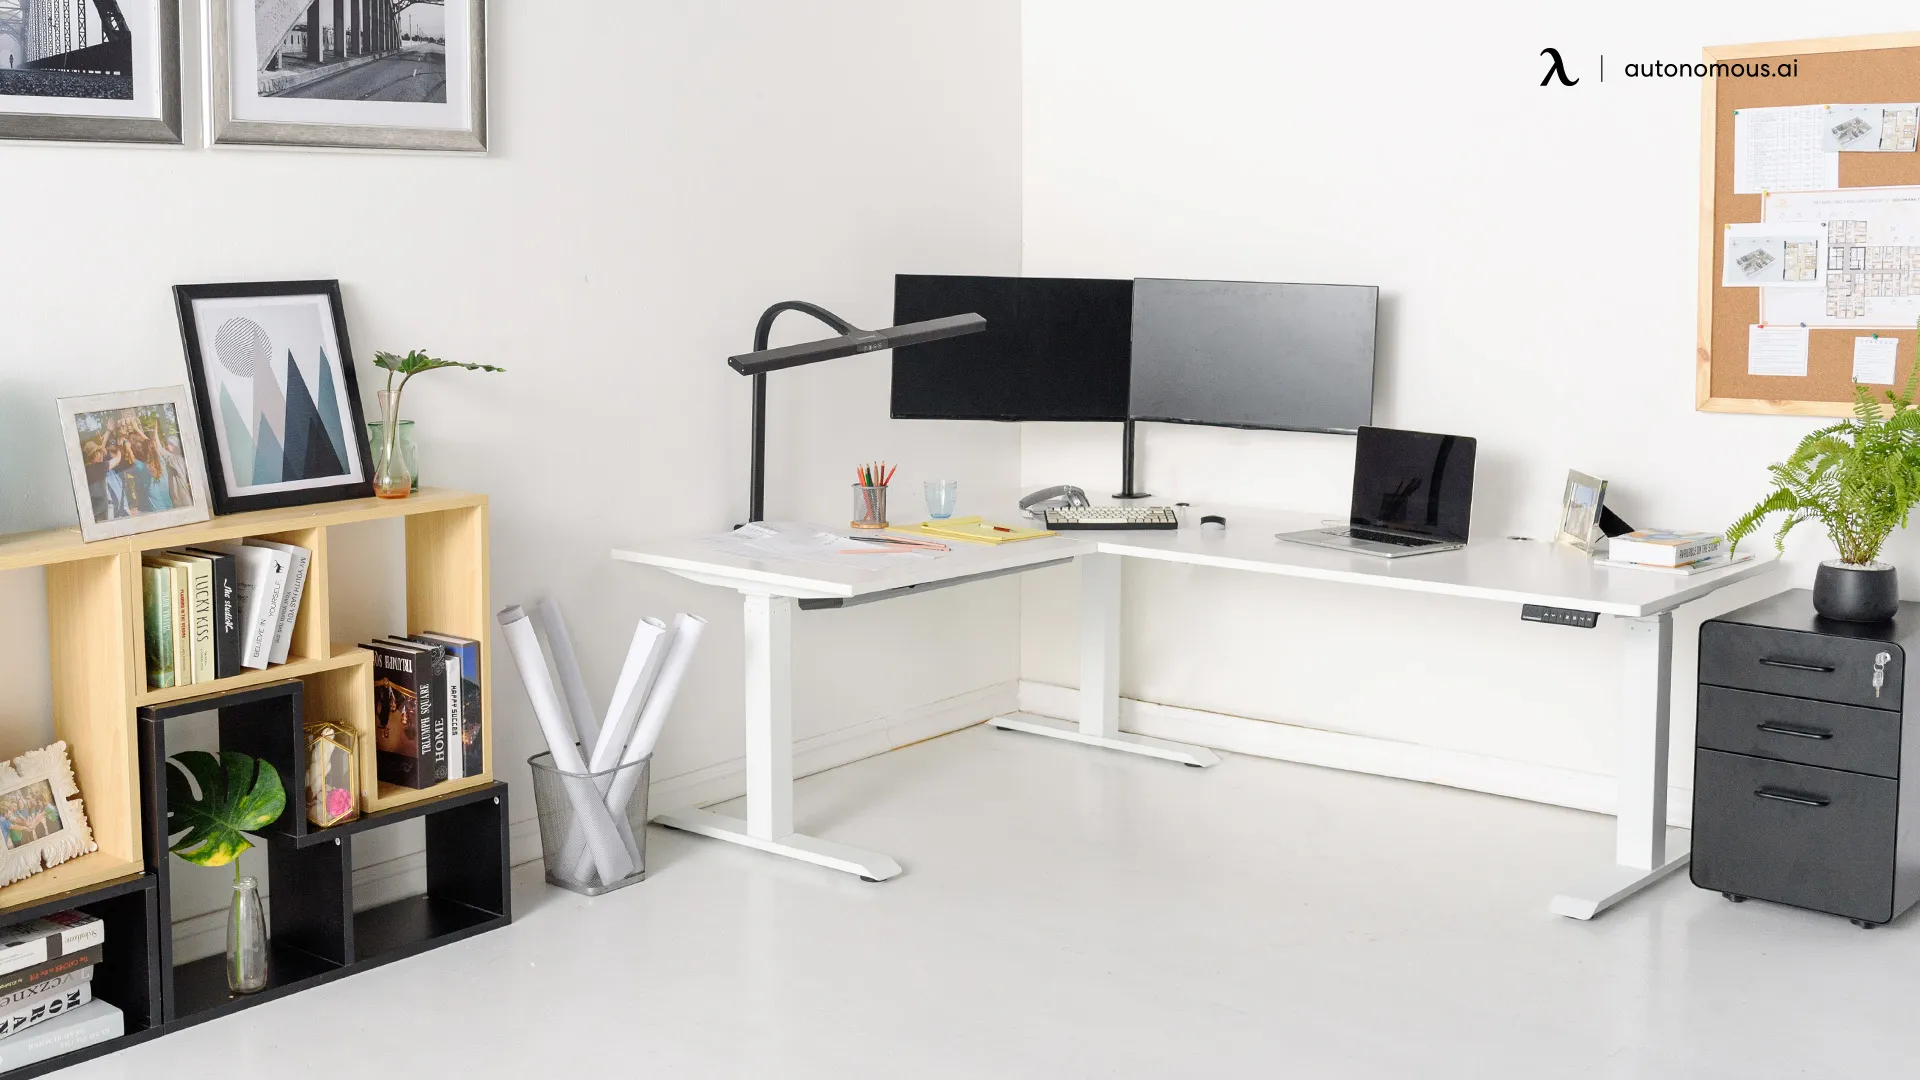 Setting Up an Ergonomic L-Shaped Desk for Home Office